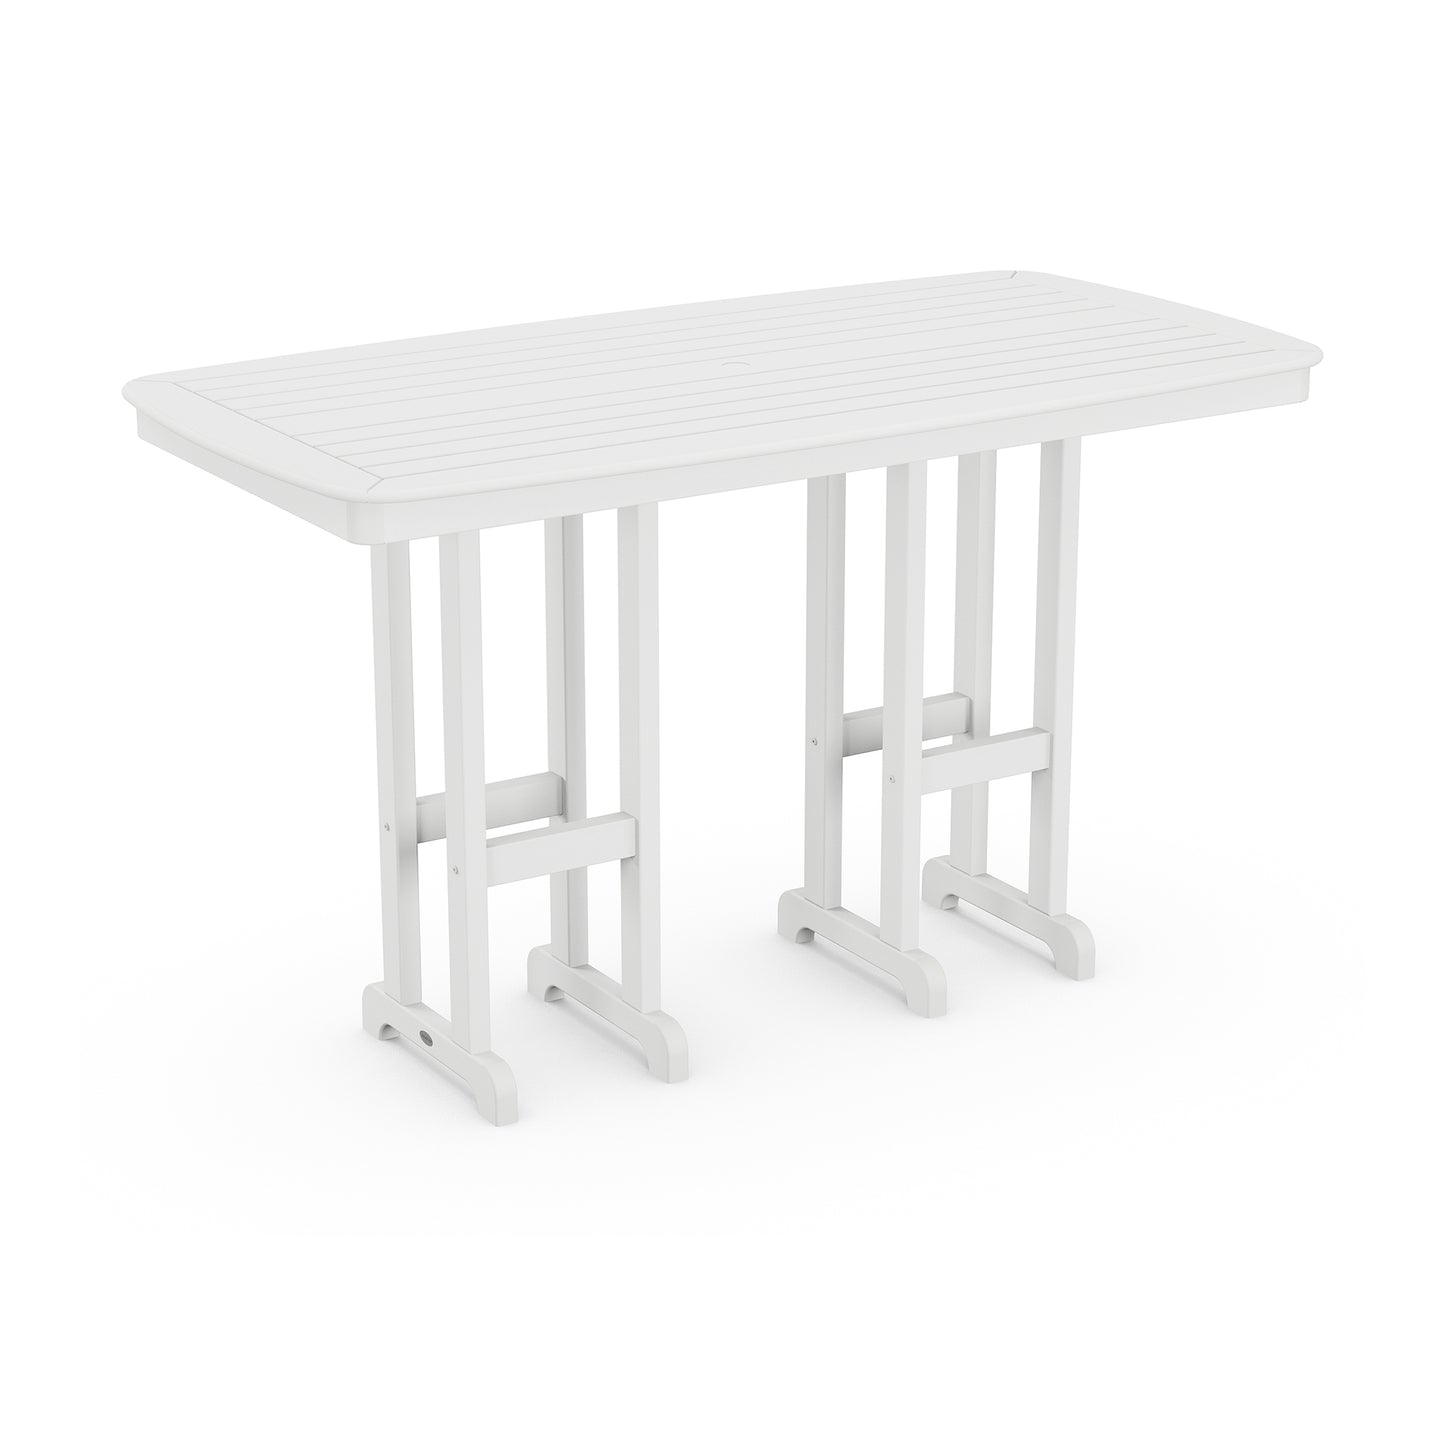 A white, modern POLYWOOD Nautical 37" x 72" Bar Table with a slatted top and metal legs, featuring a simple, clean design. The table is shown on a plain white background.